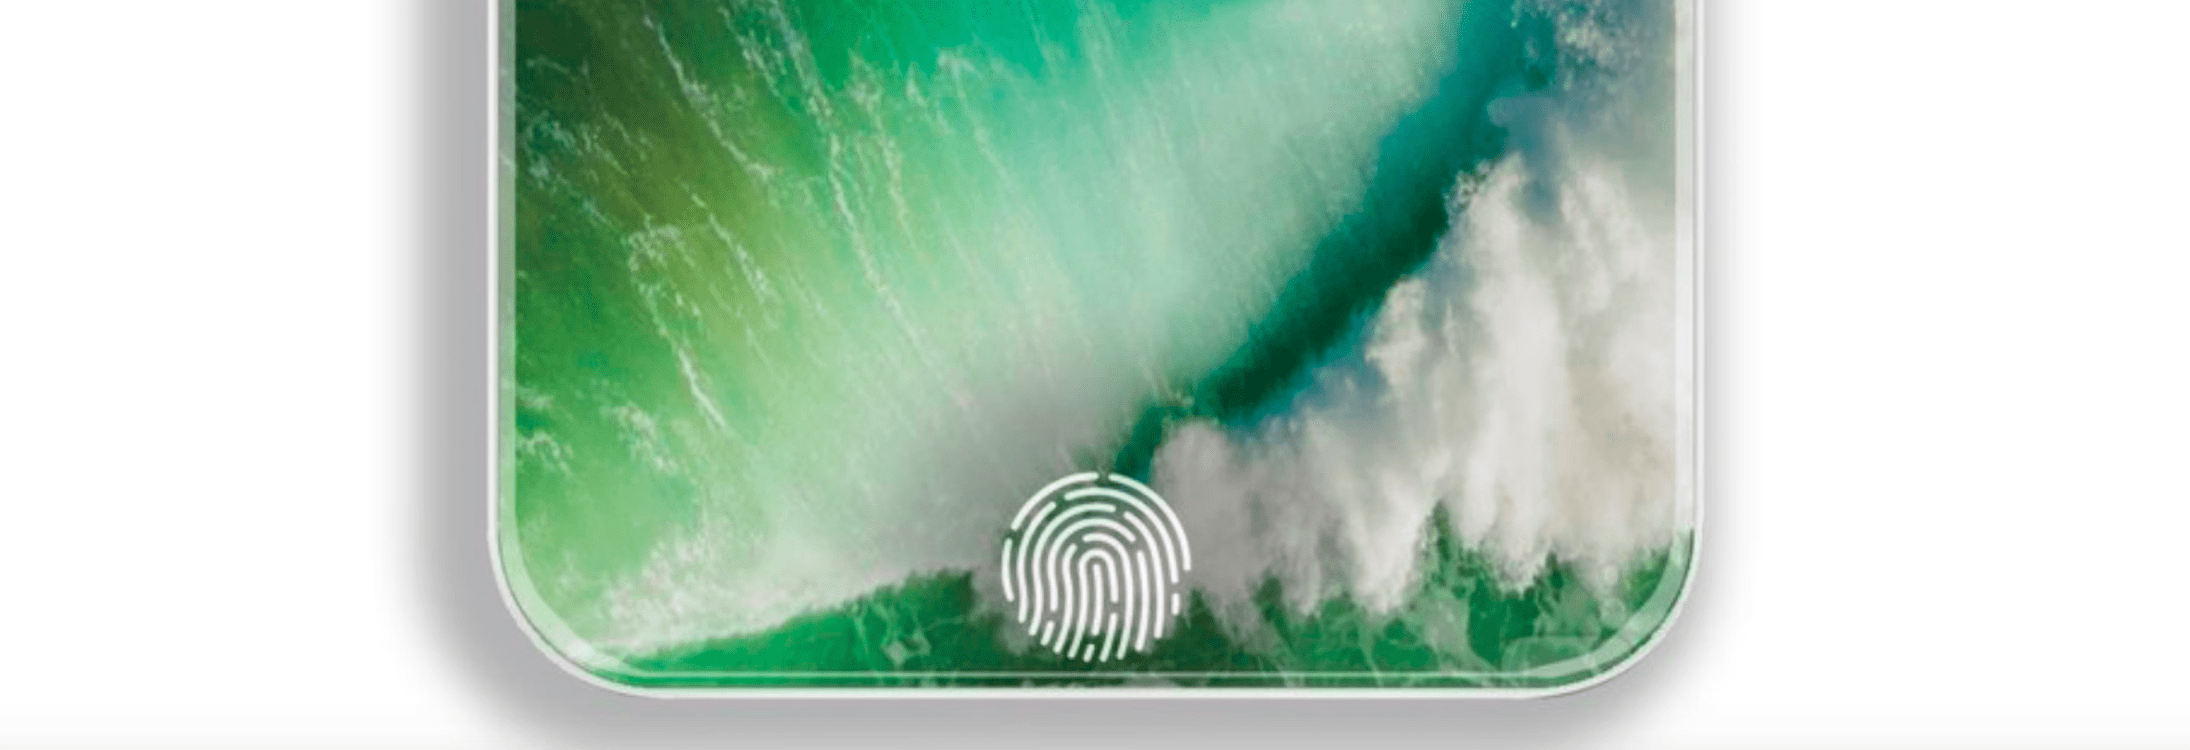 iPhone con Touch ID 2.0